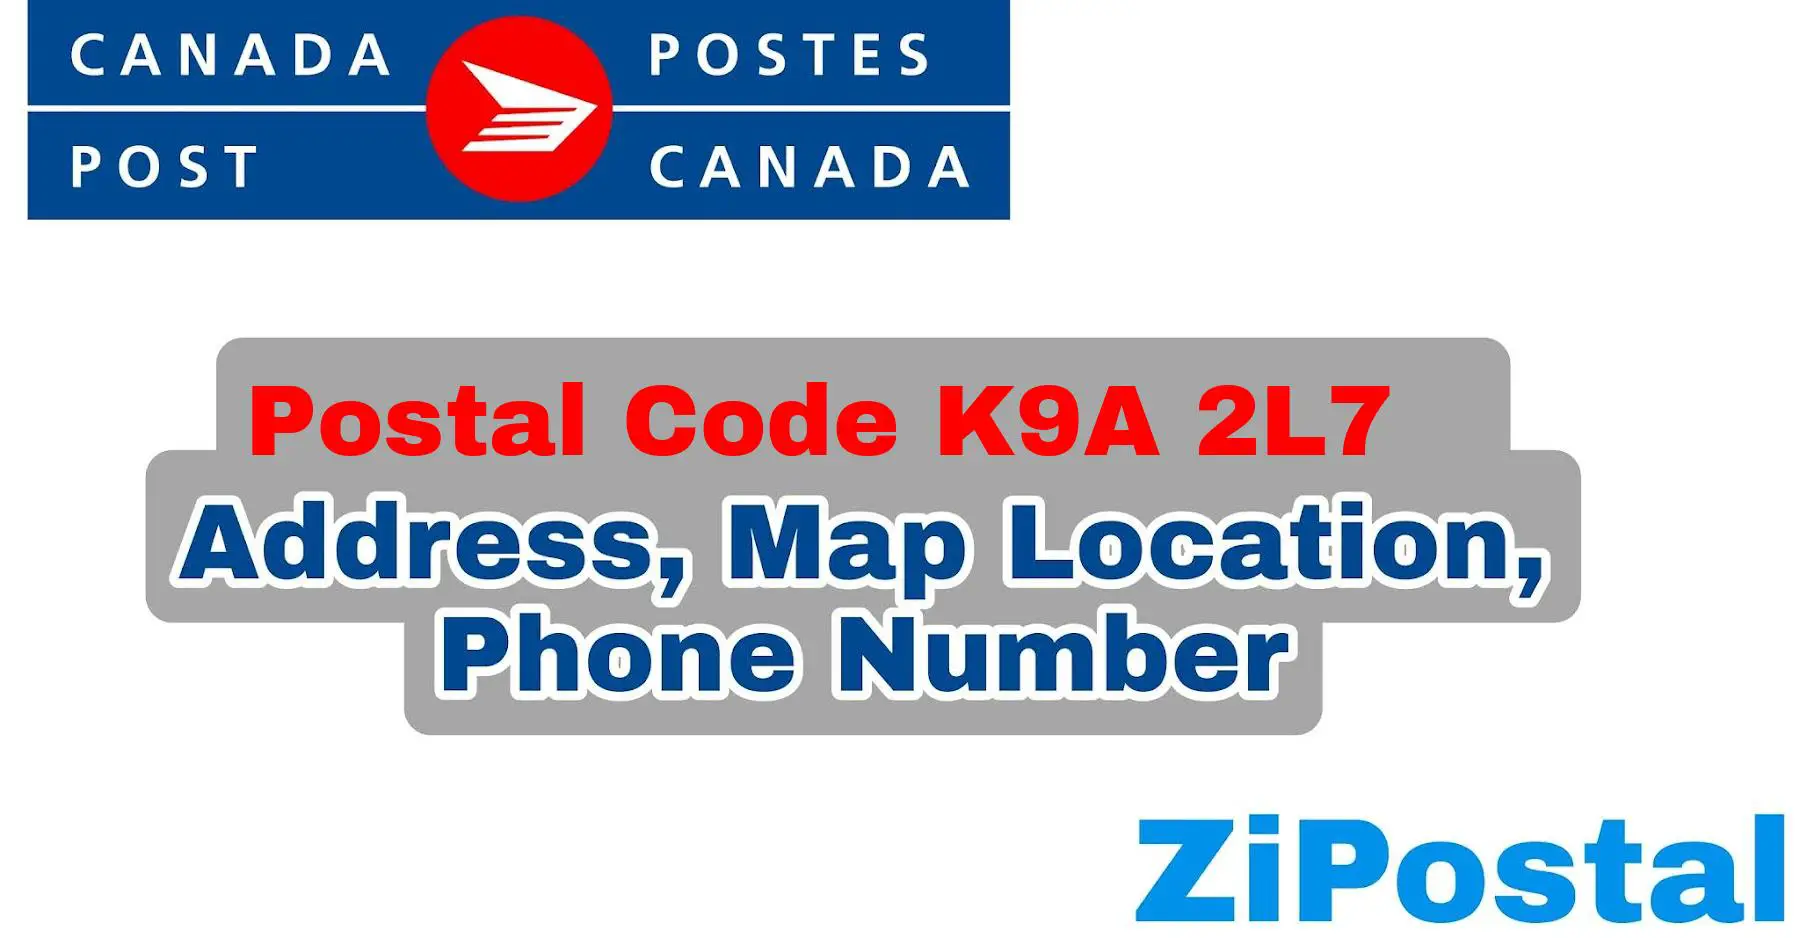 Postal Code K9A 2L7 Address Map Location and Phone Number